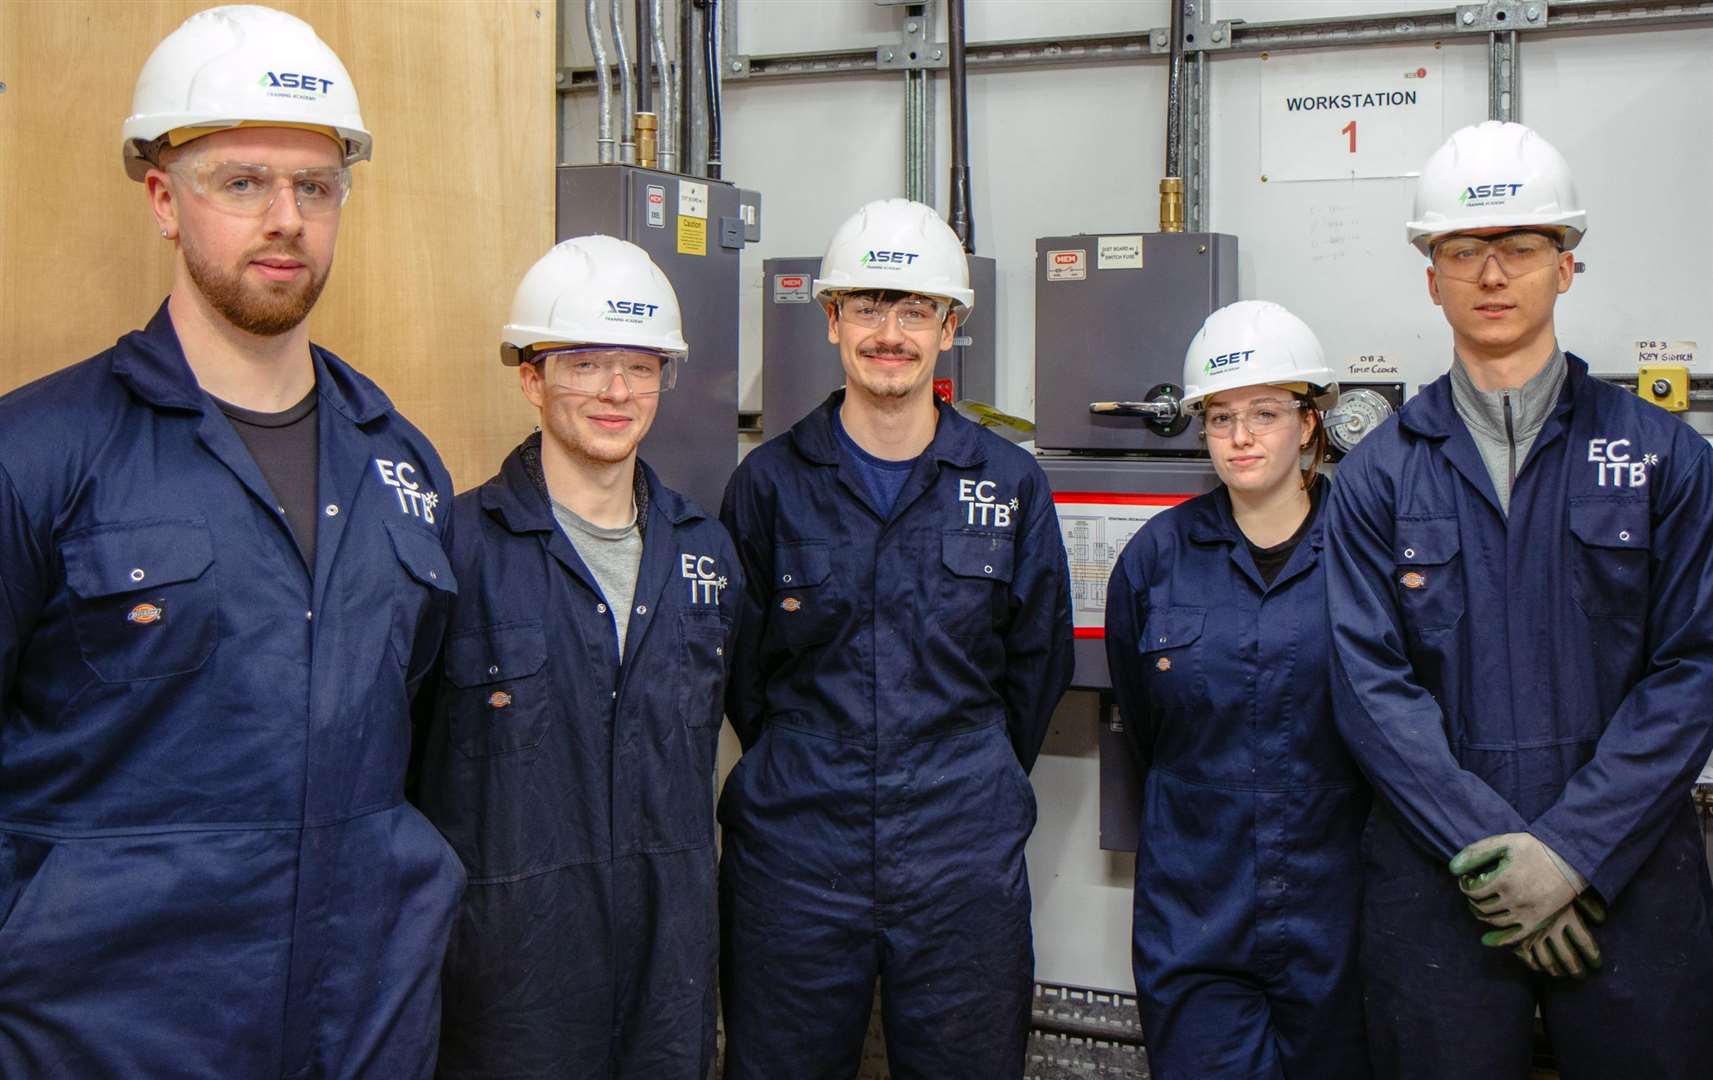 Wind Turbine Technician scholars are nearing the end of their course.